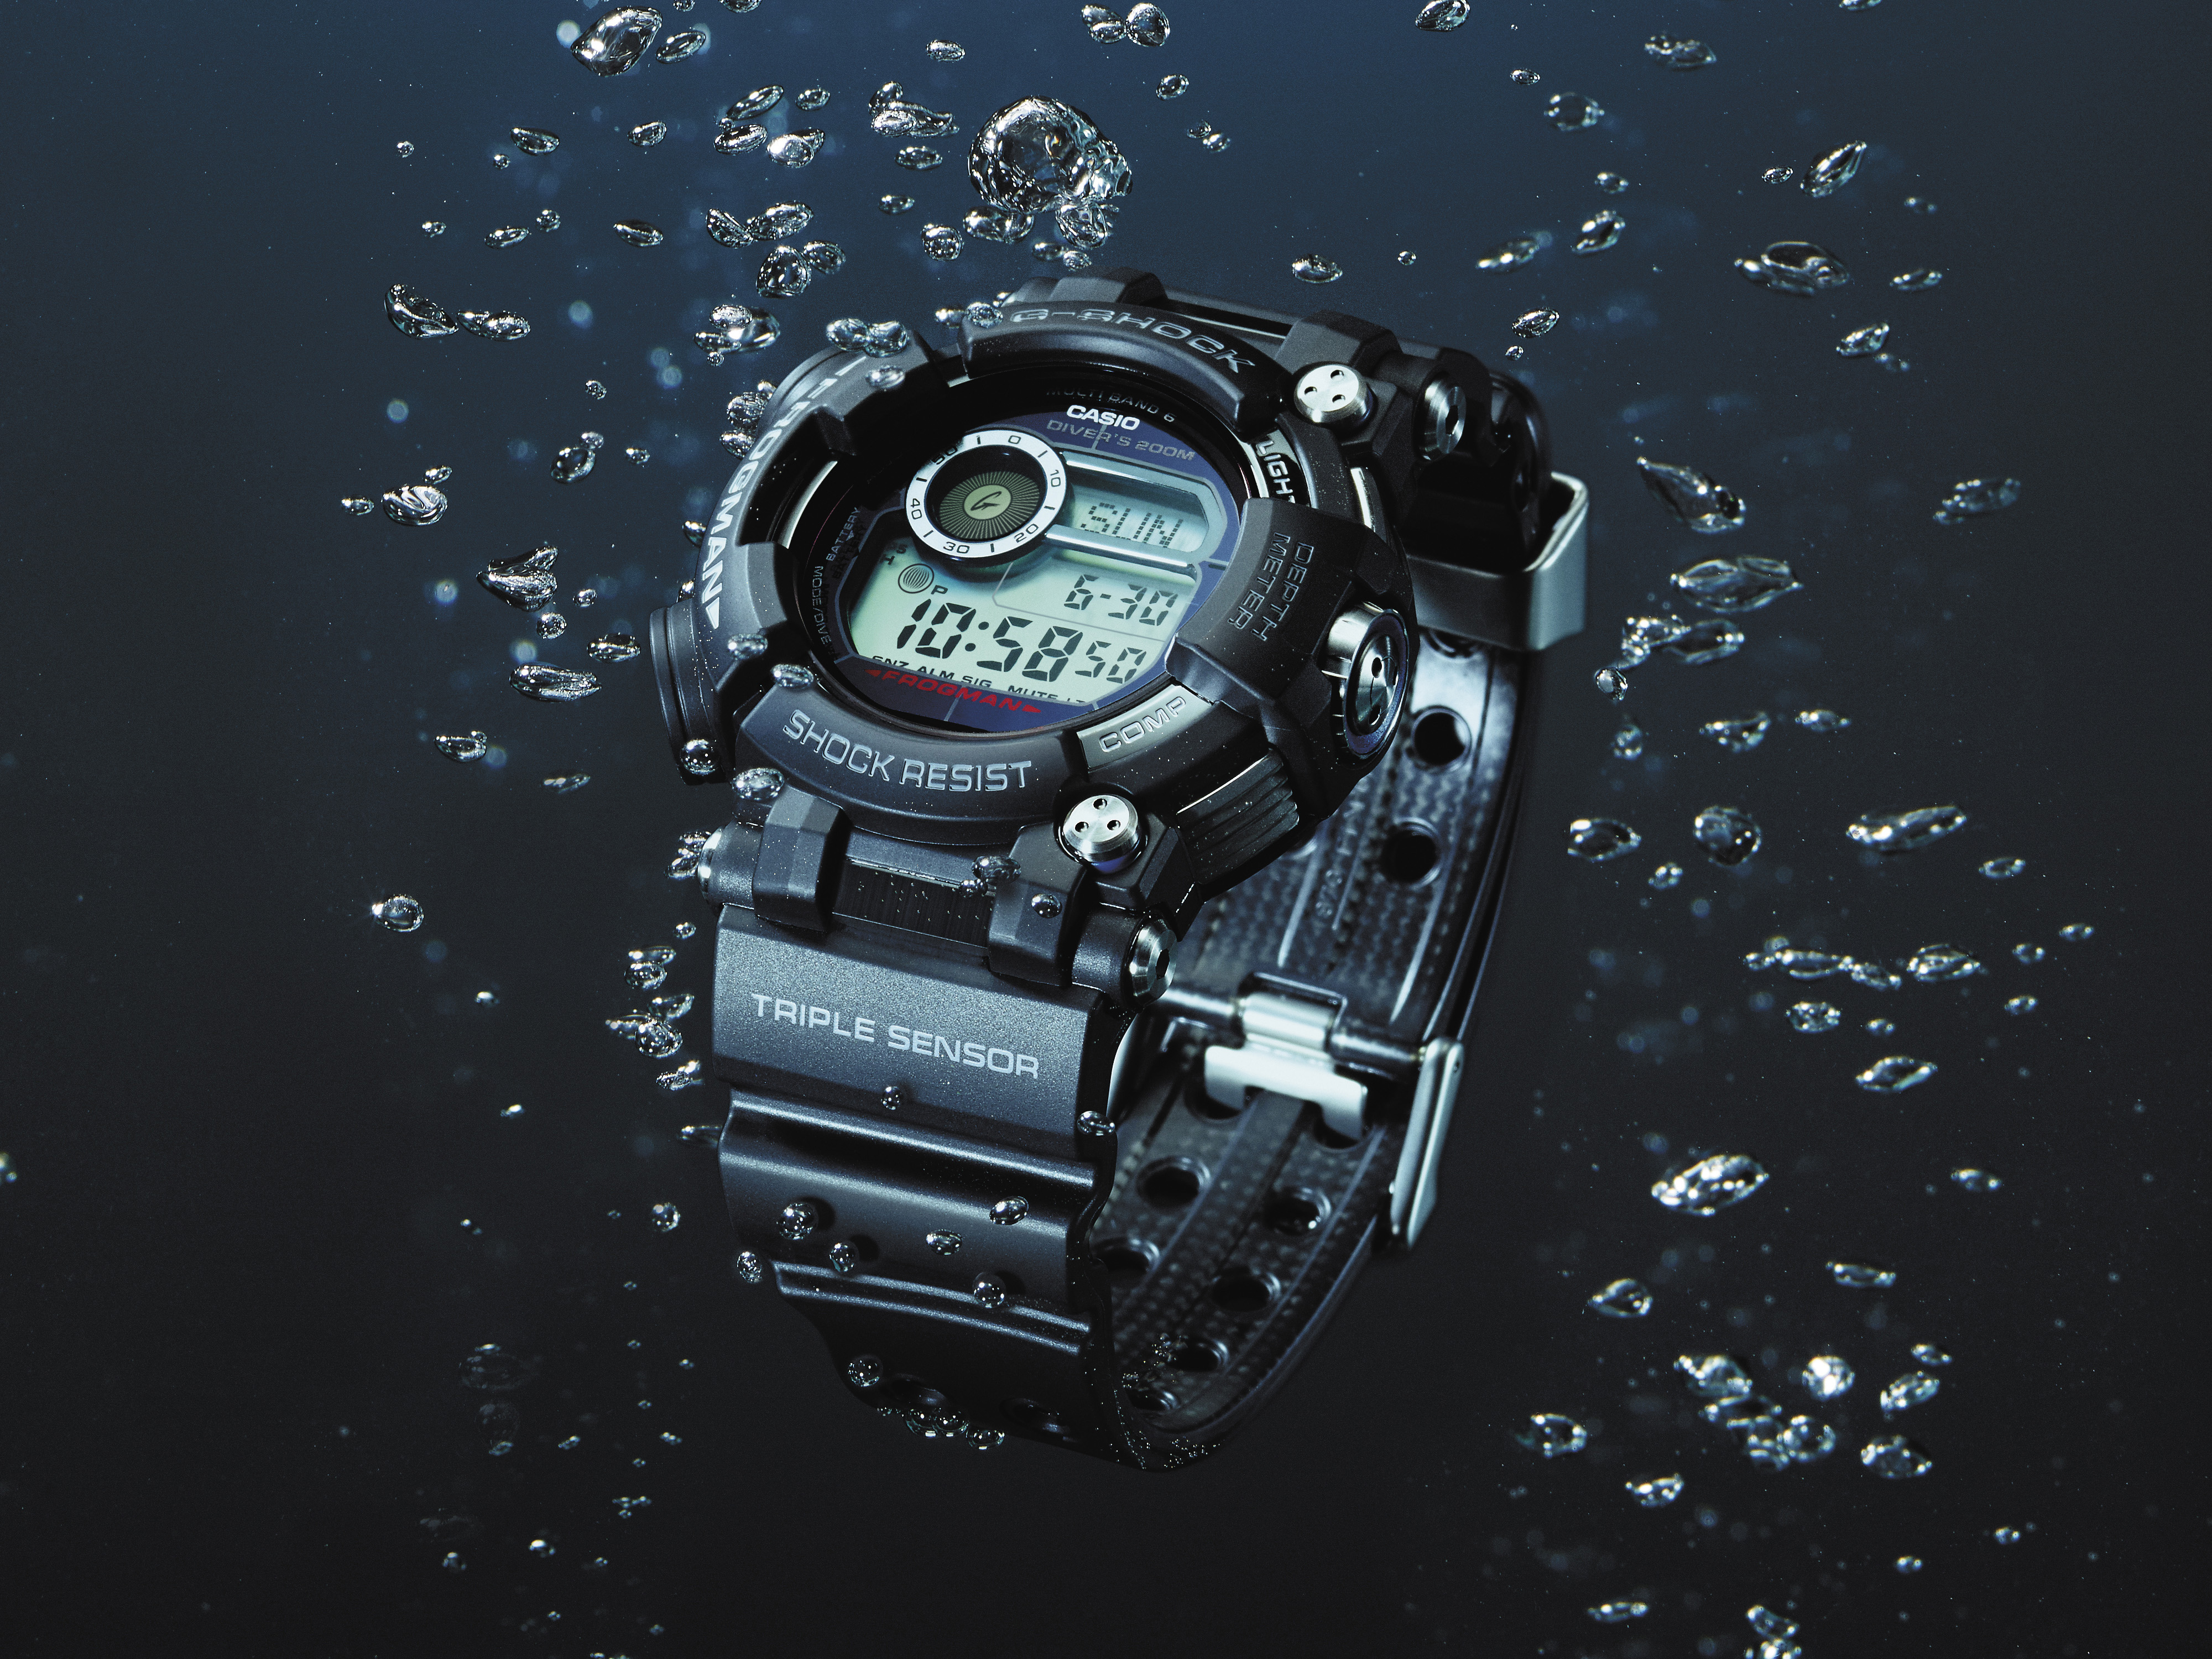 Updated G-SHOCK Frogman on the way